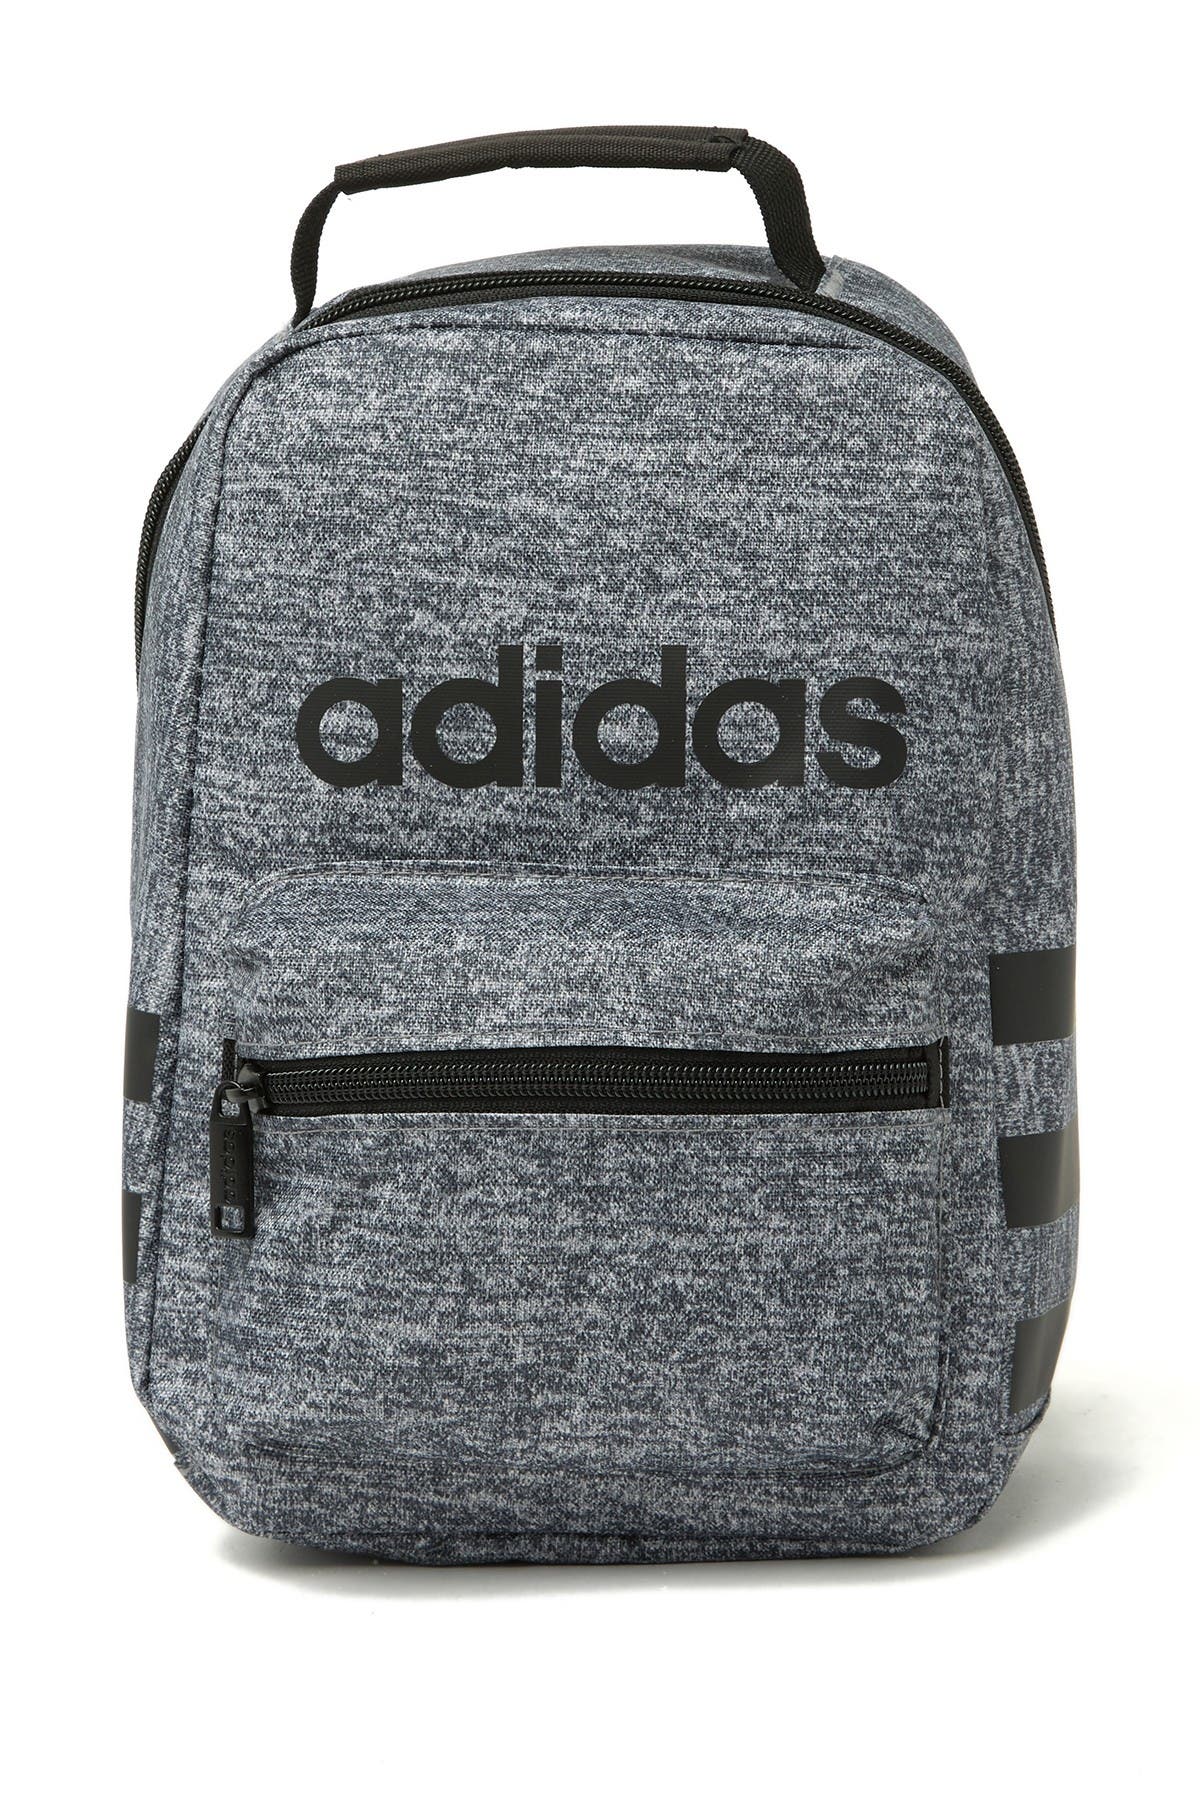 black and white adidas lunch box